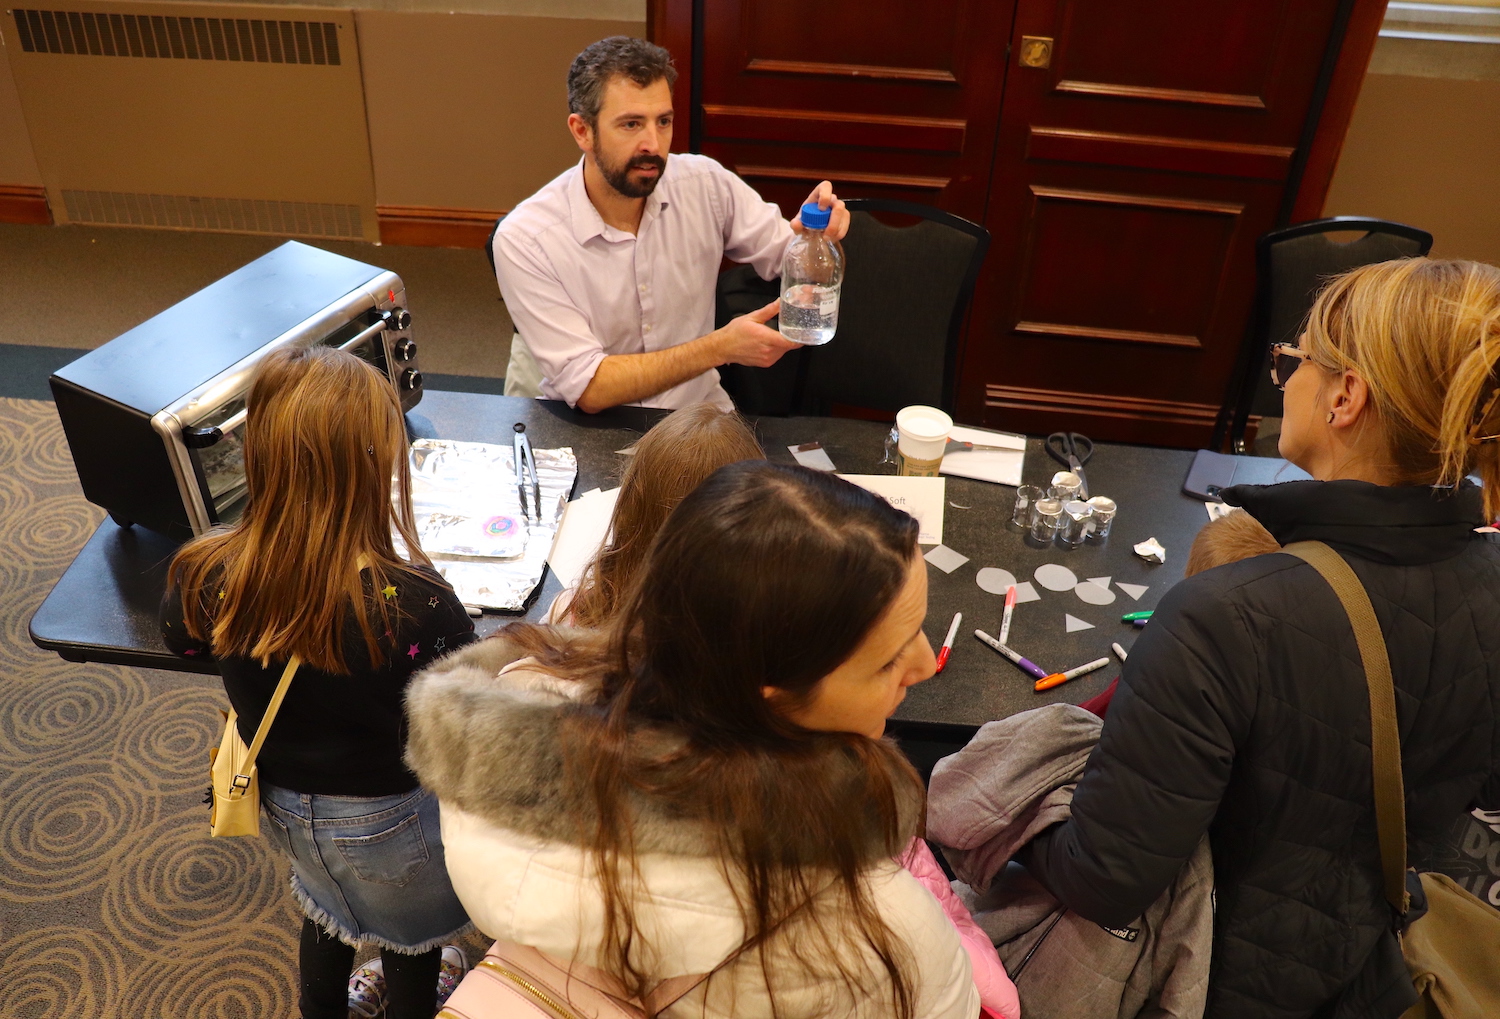 Chris O’Bryan, an assistant professor in the Department of Mechanical and Aerospace Engineering, demonstrated for expo attendees his research into developing new methods in soft matter 3D printing and designing new biomaterials.